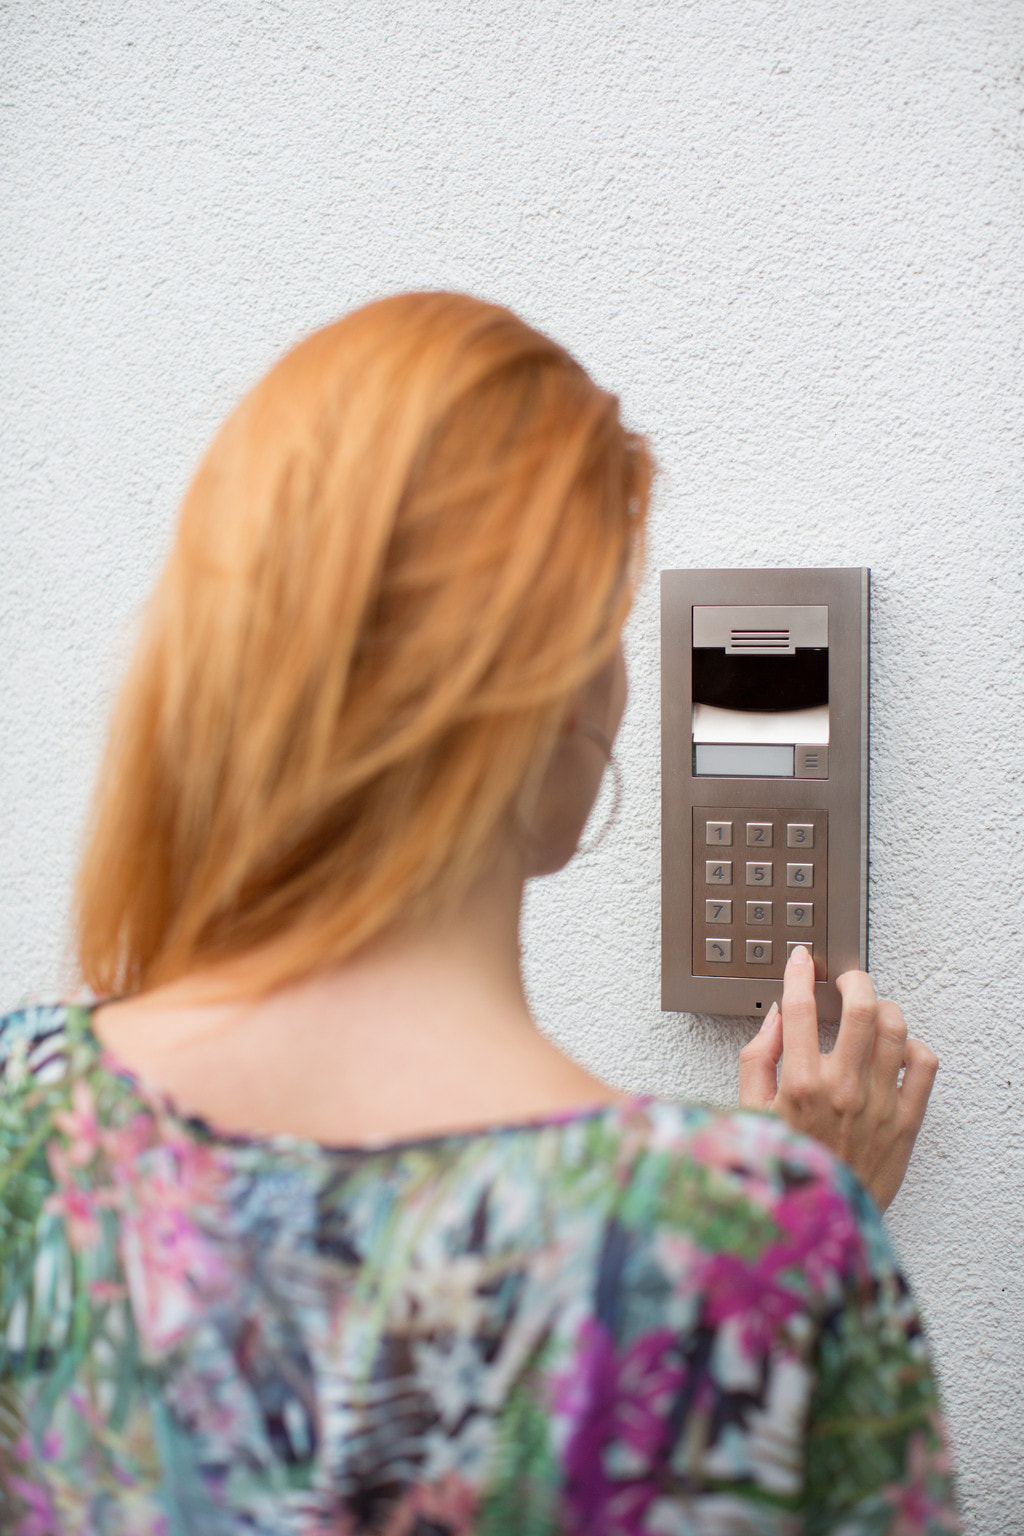 Lady using our Control4 home security access panel